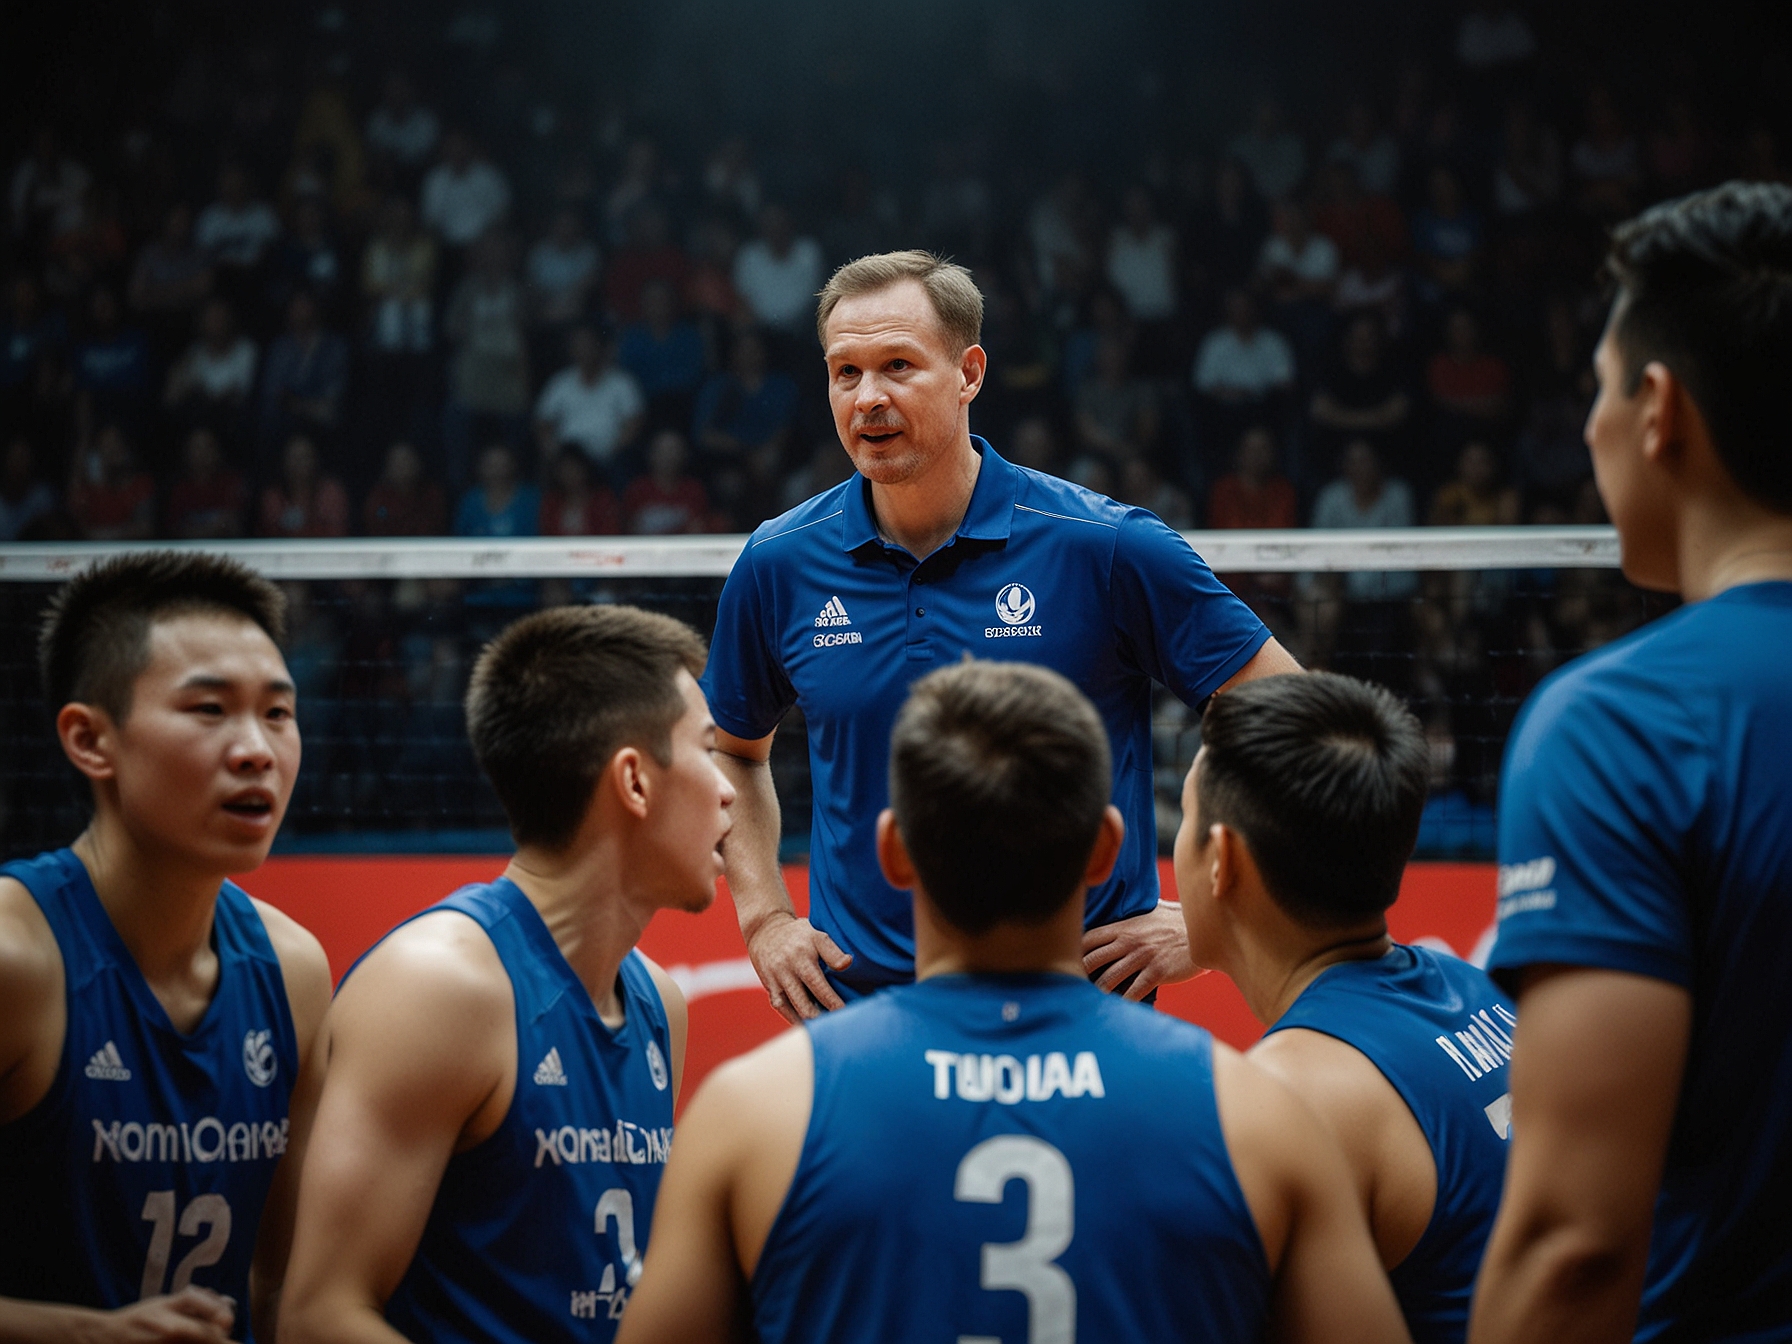 Coach Tuomas Sammelvuo motivates his players during a high-intensity match in the Manila Leg, emphasizing continuous improvement and preparation for the upcoming challenges in the VNL Final Eight.